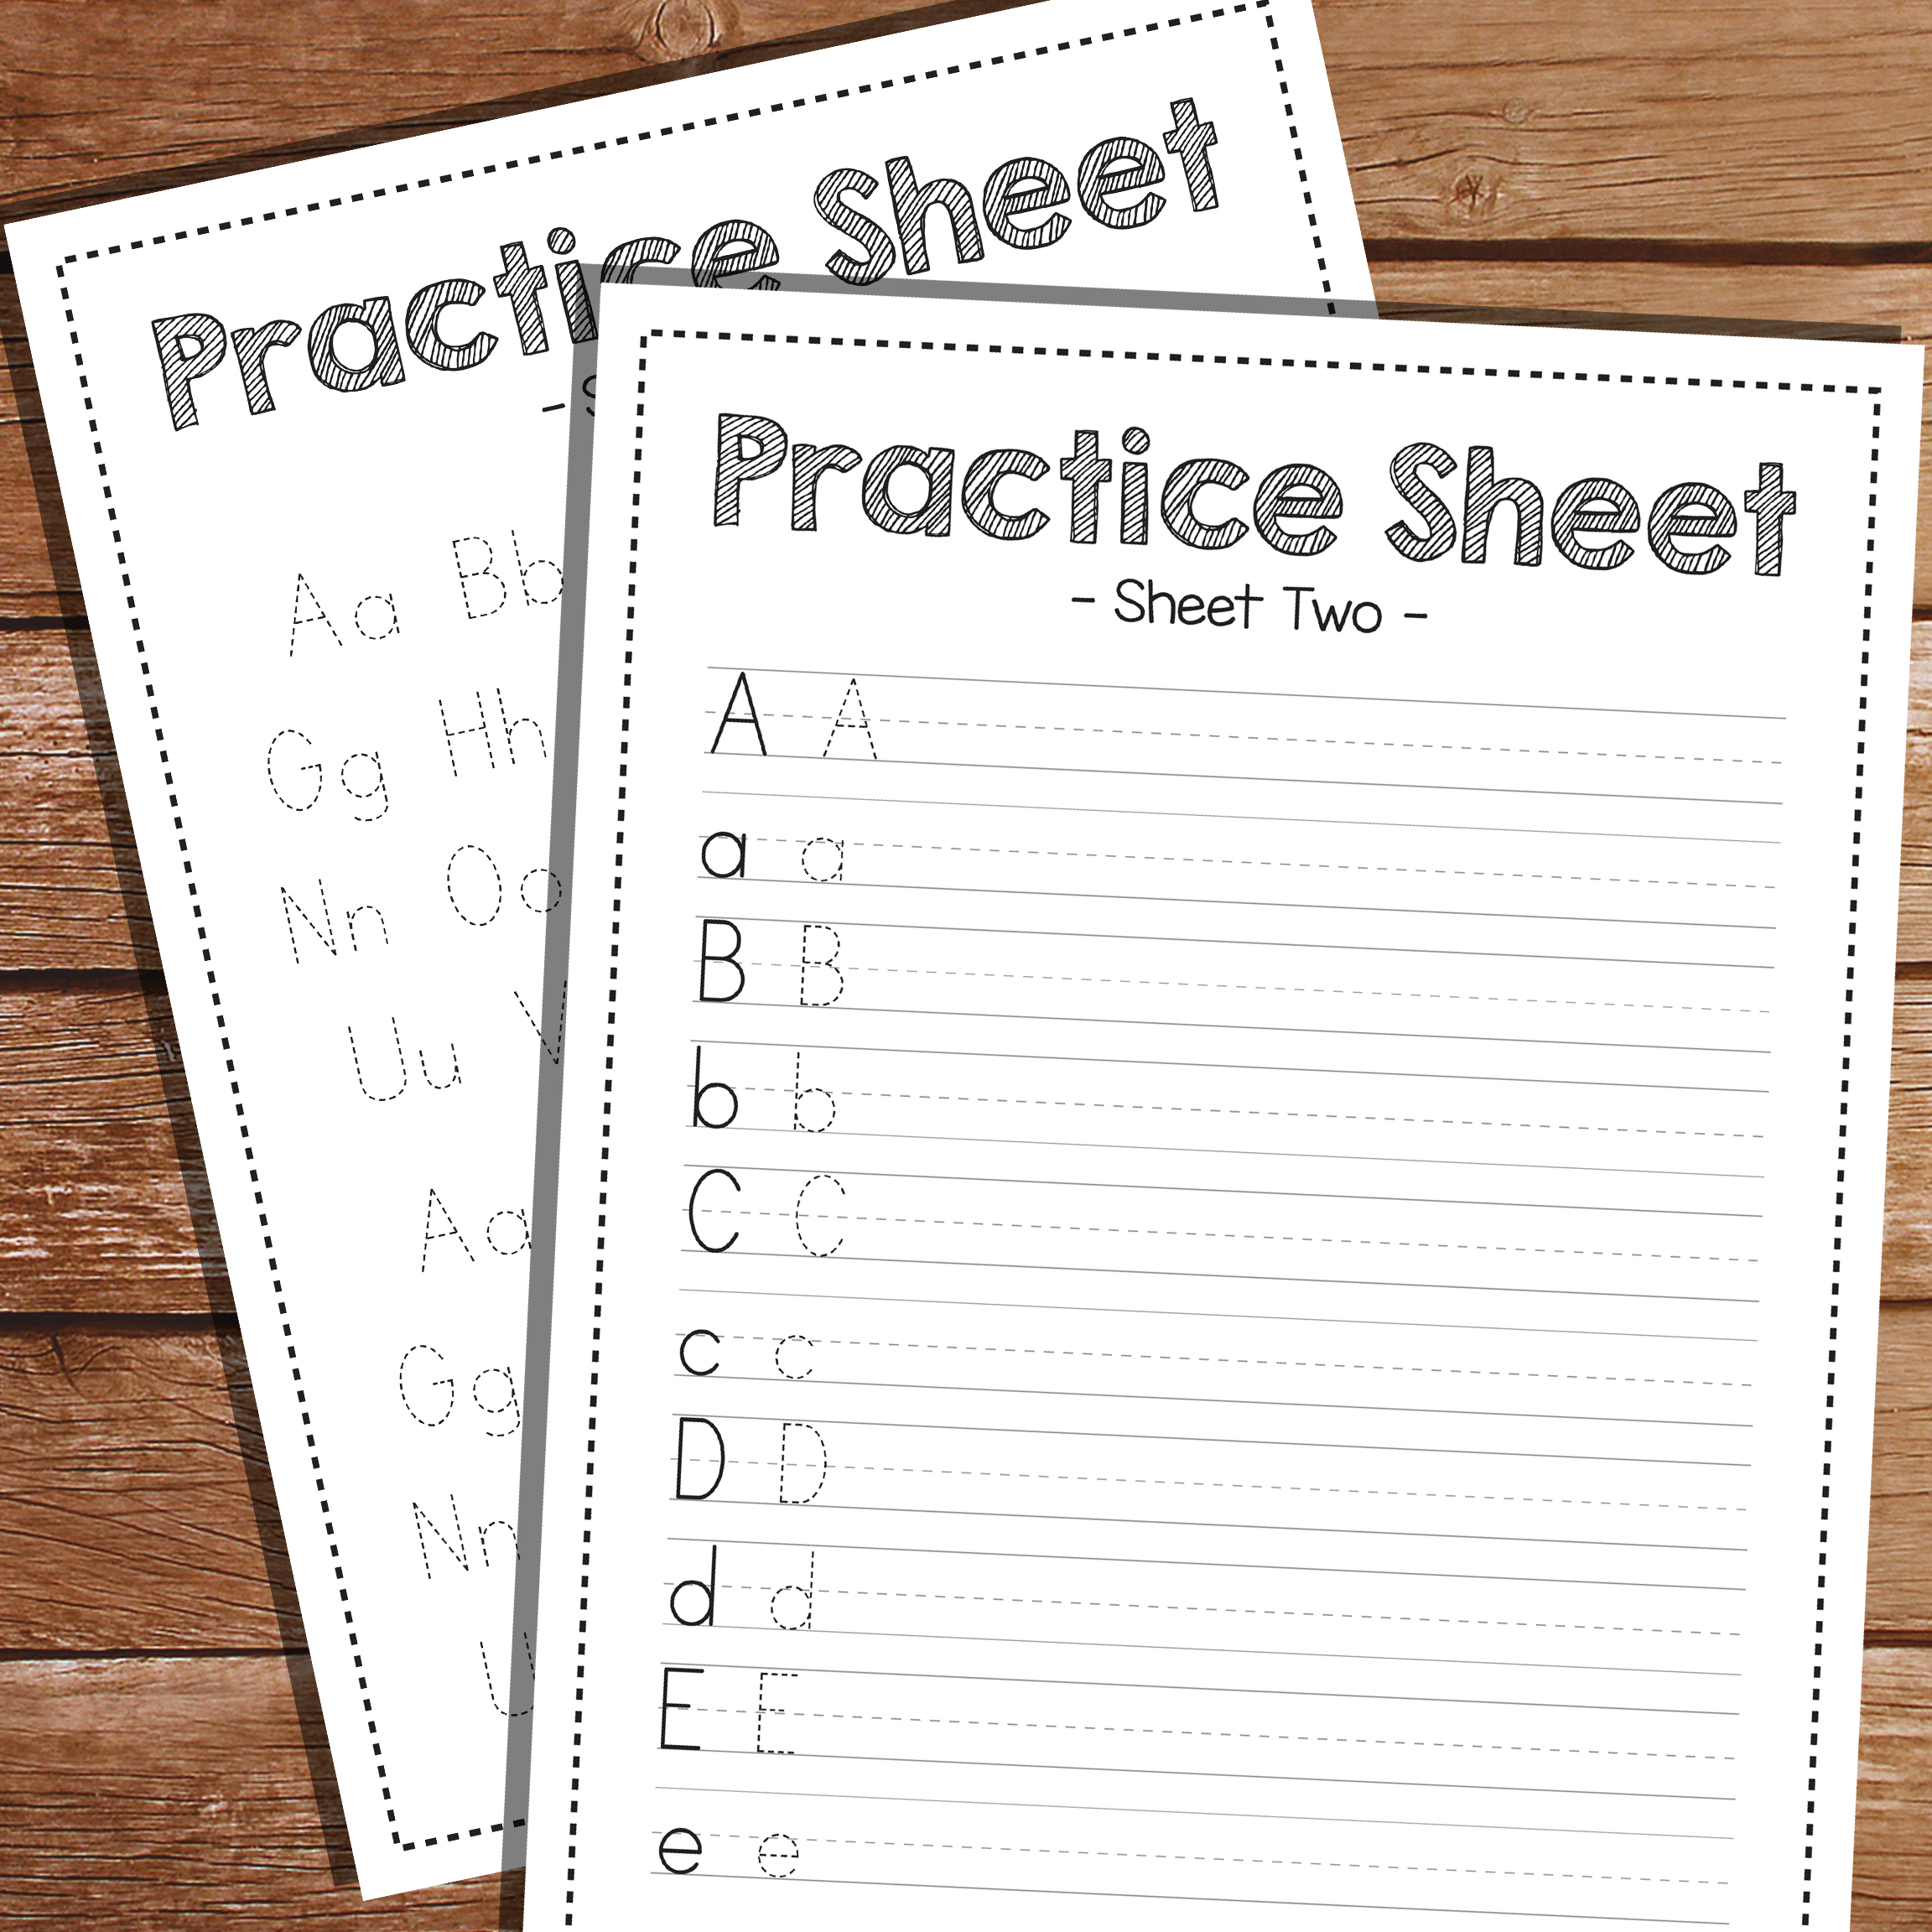 Printable practice sheets for learning to write upper and lower case letters.